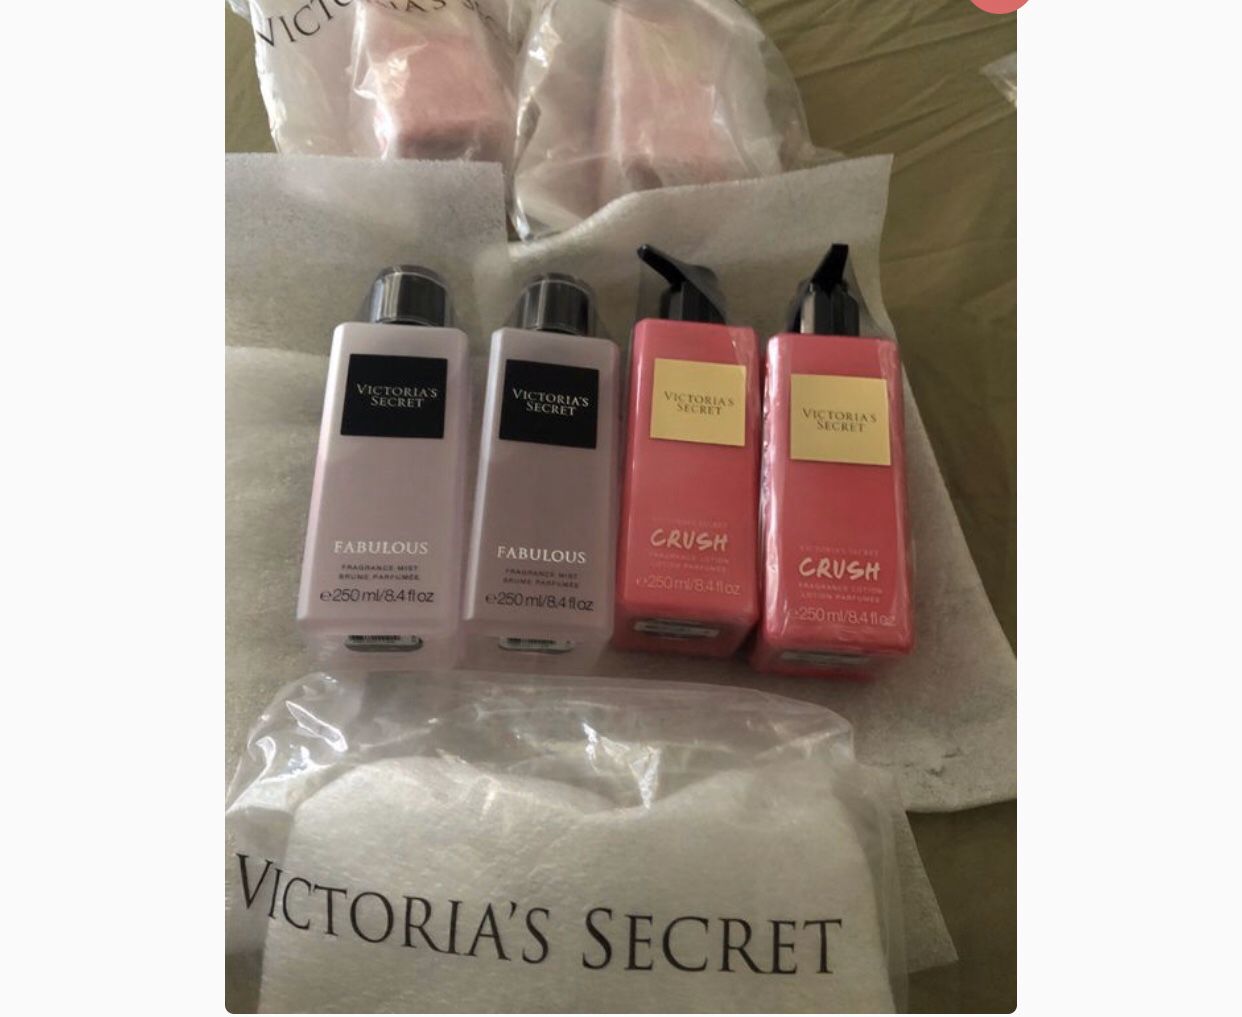 NEW VS FRAGRANCE LOTIONS AND SPRAYS